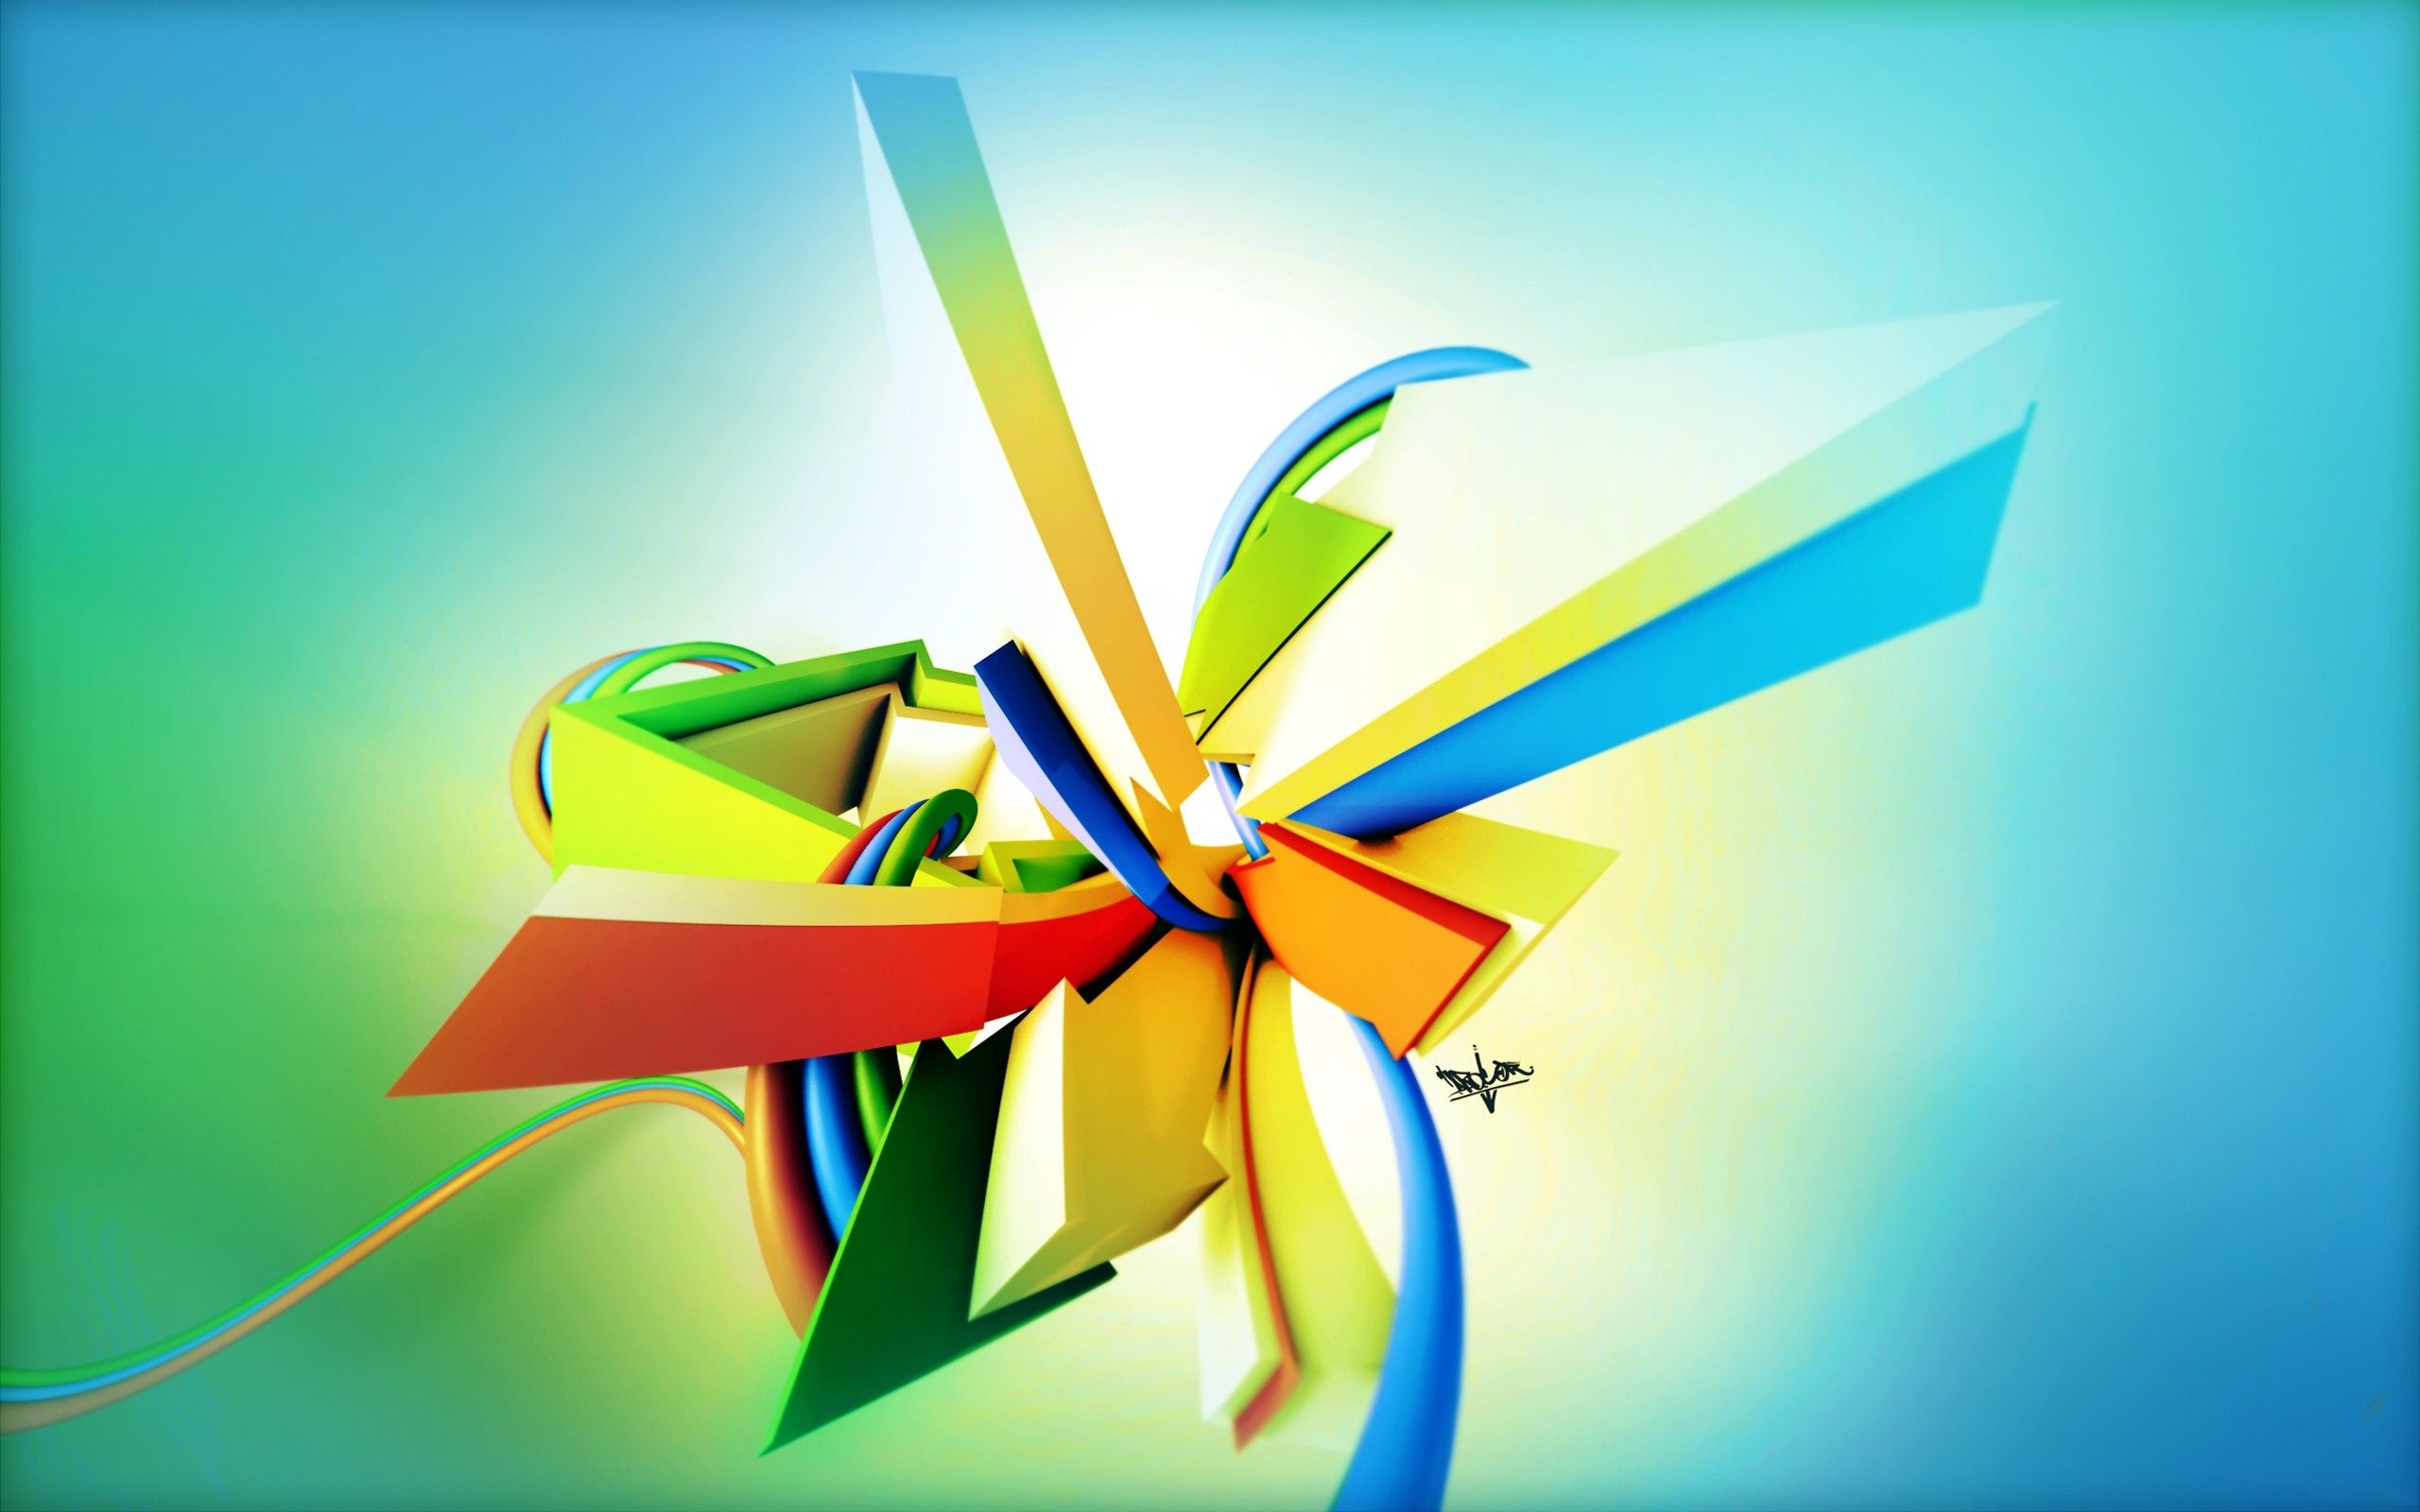 HD wallpaper, 3D, Colorful, Abstract